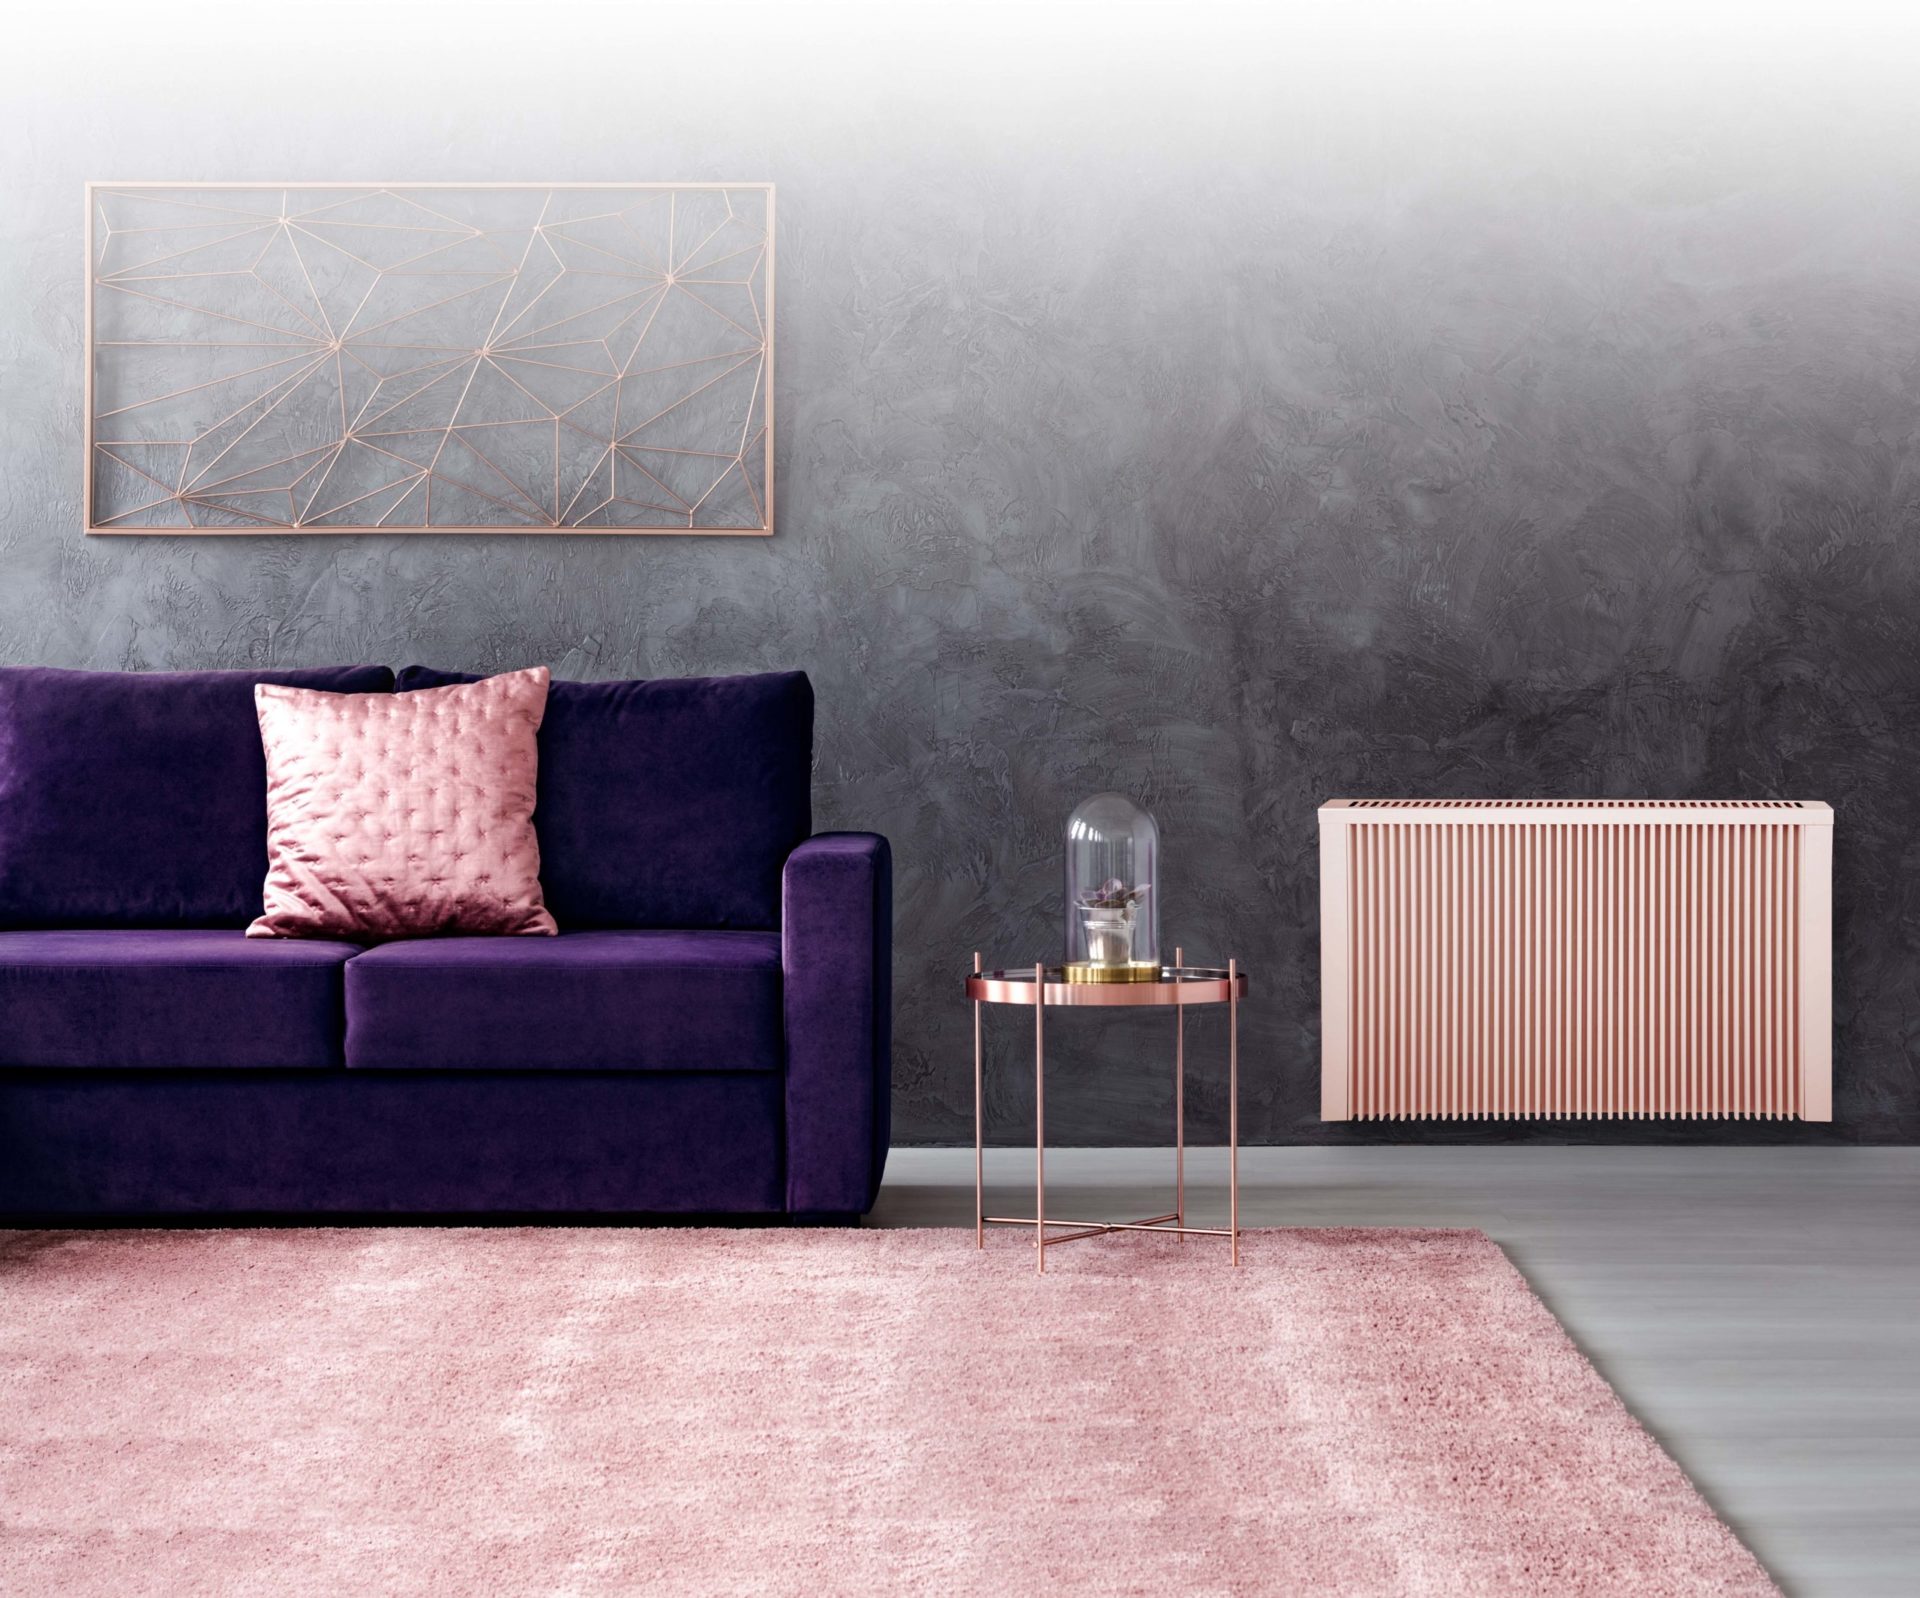 Shiny metal Sunflow electric radiator in a stylish living room with a purple sofa, salmon cushion, and carpet.